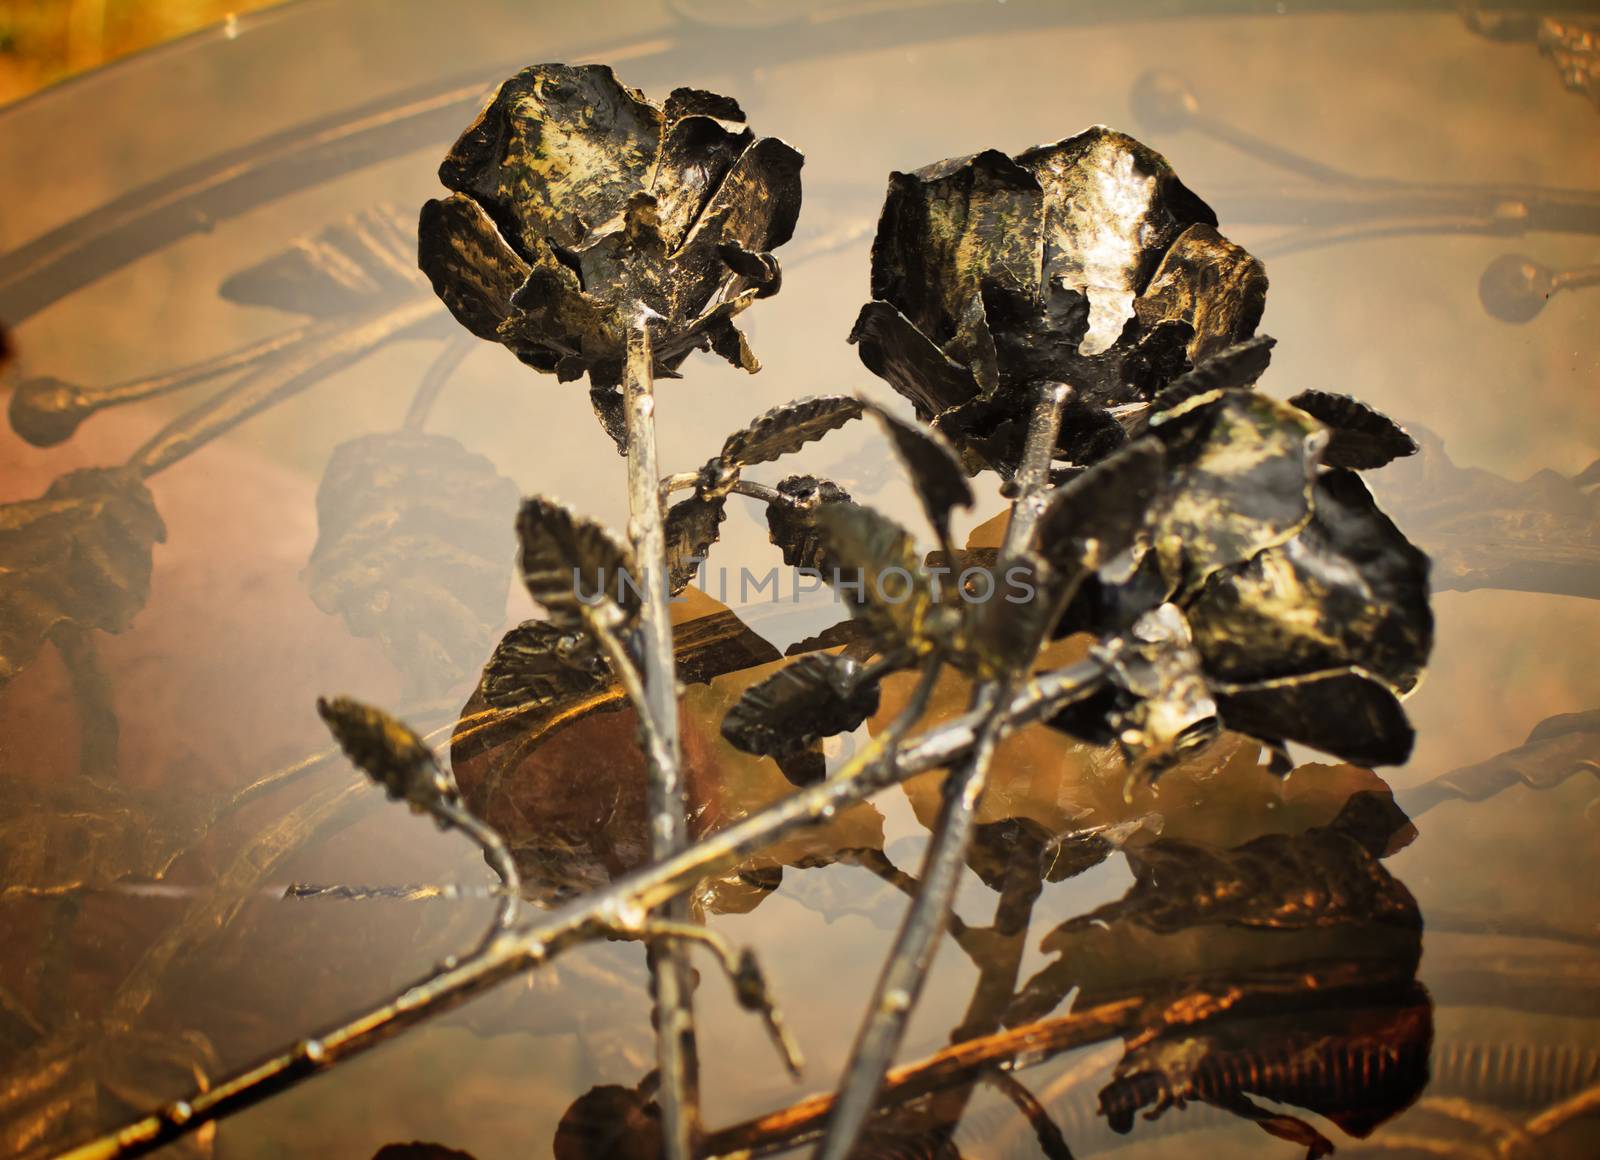 Three pretty shiny Golden rose, forged from metal. Manual work.